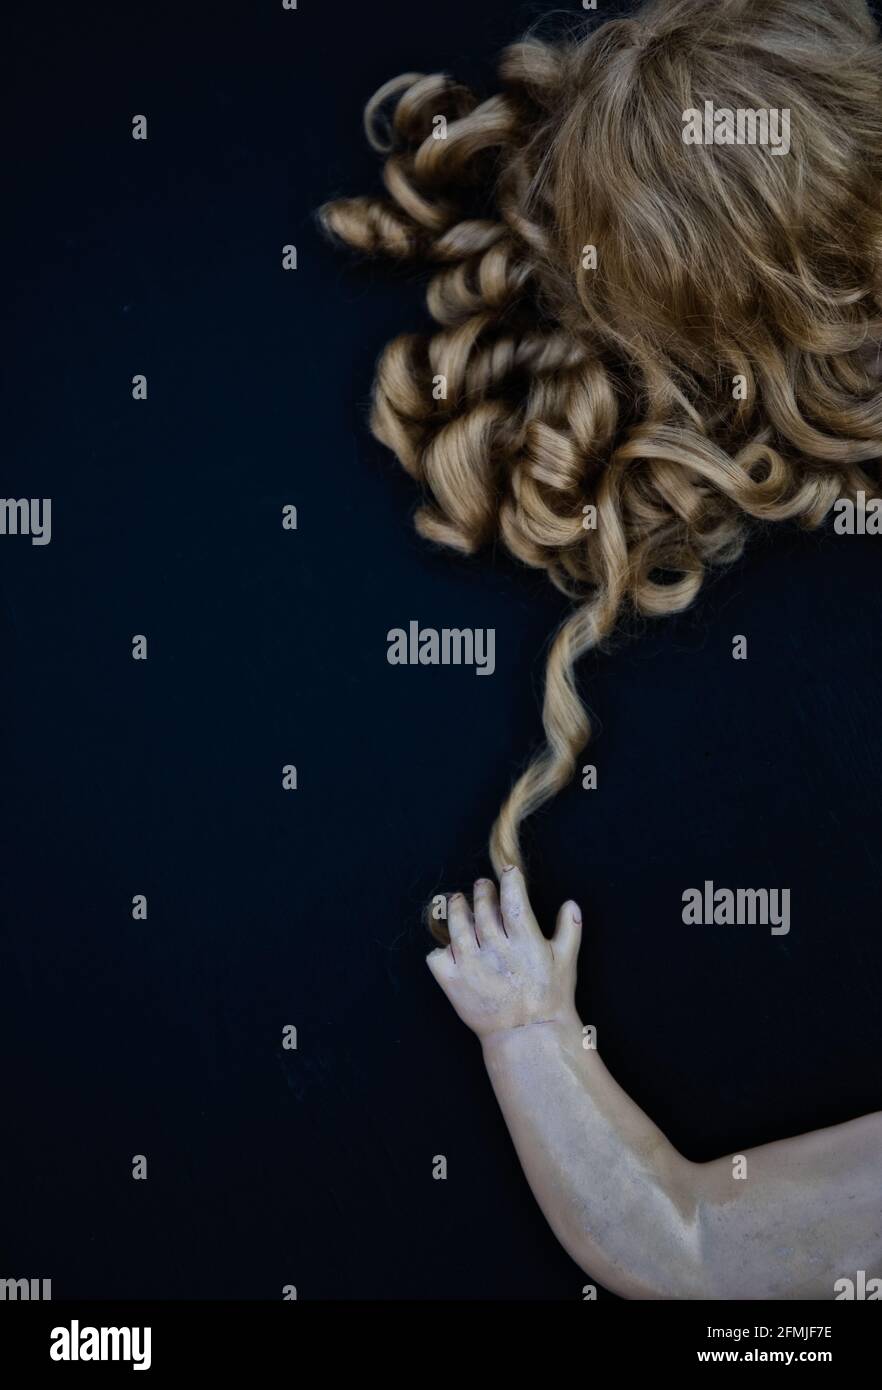 Directly above of ceramic dolls hand touching dolls curly wavy hair against black background. Concept of strange,different, curiosity,intrigue Stock Photo